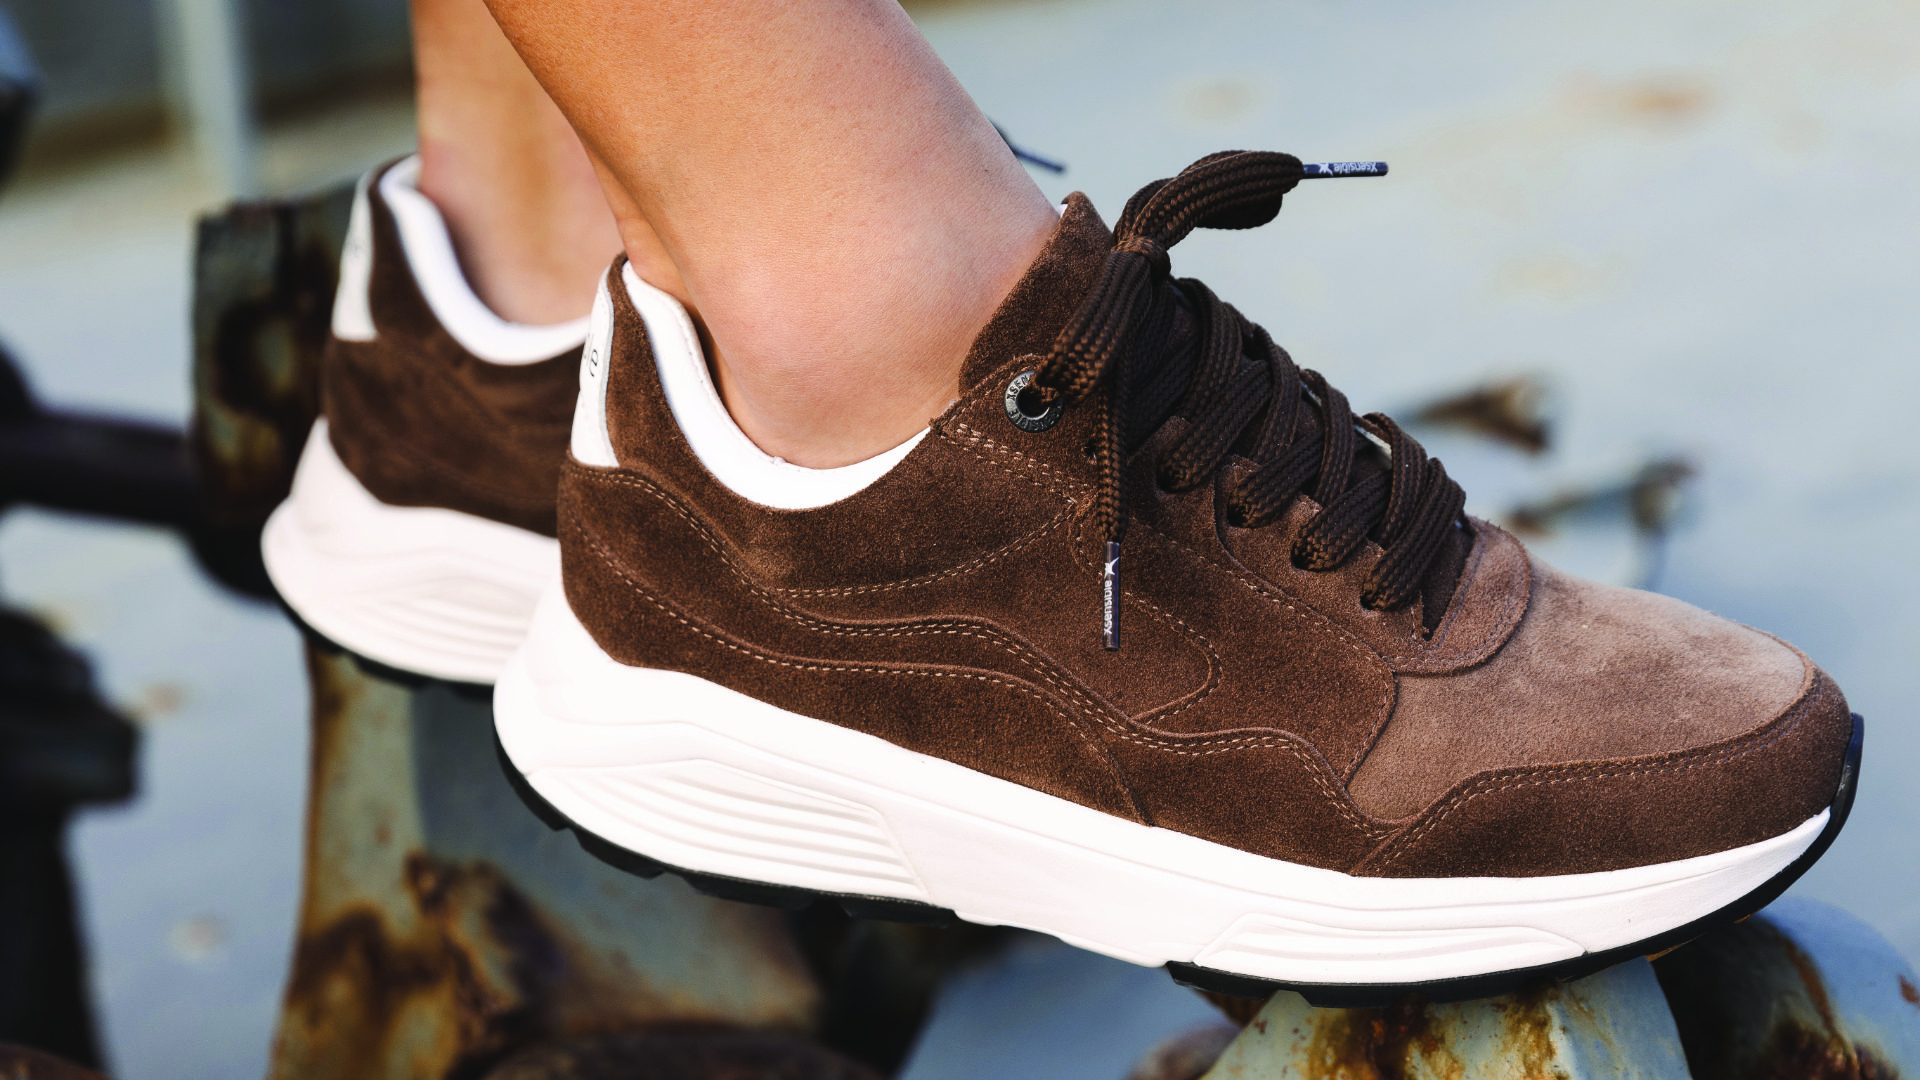 A close-up of a woman's feet wearing Xsensible Next Generation shoes in a rich brown suede finish. These shoes are designed to promote better posture by promoting a more natural walking cycle. With their unique design and premium materials, these shoes can be a great option to help improve posture and alleviate back pain.